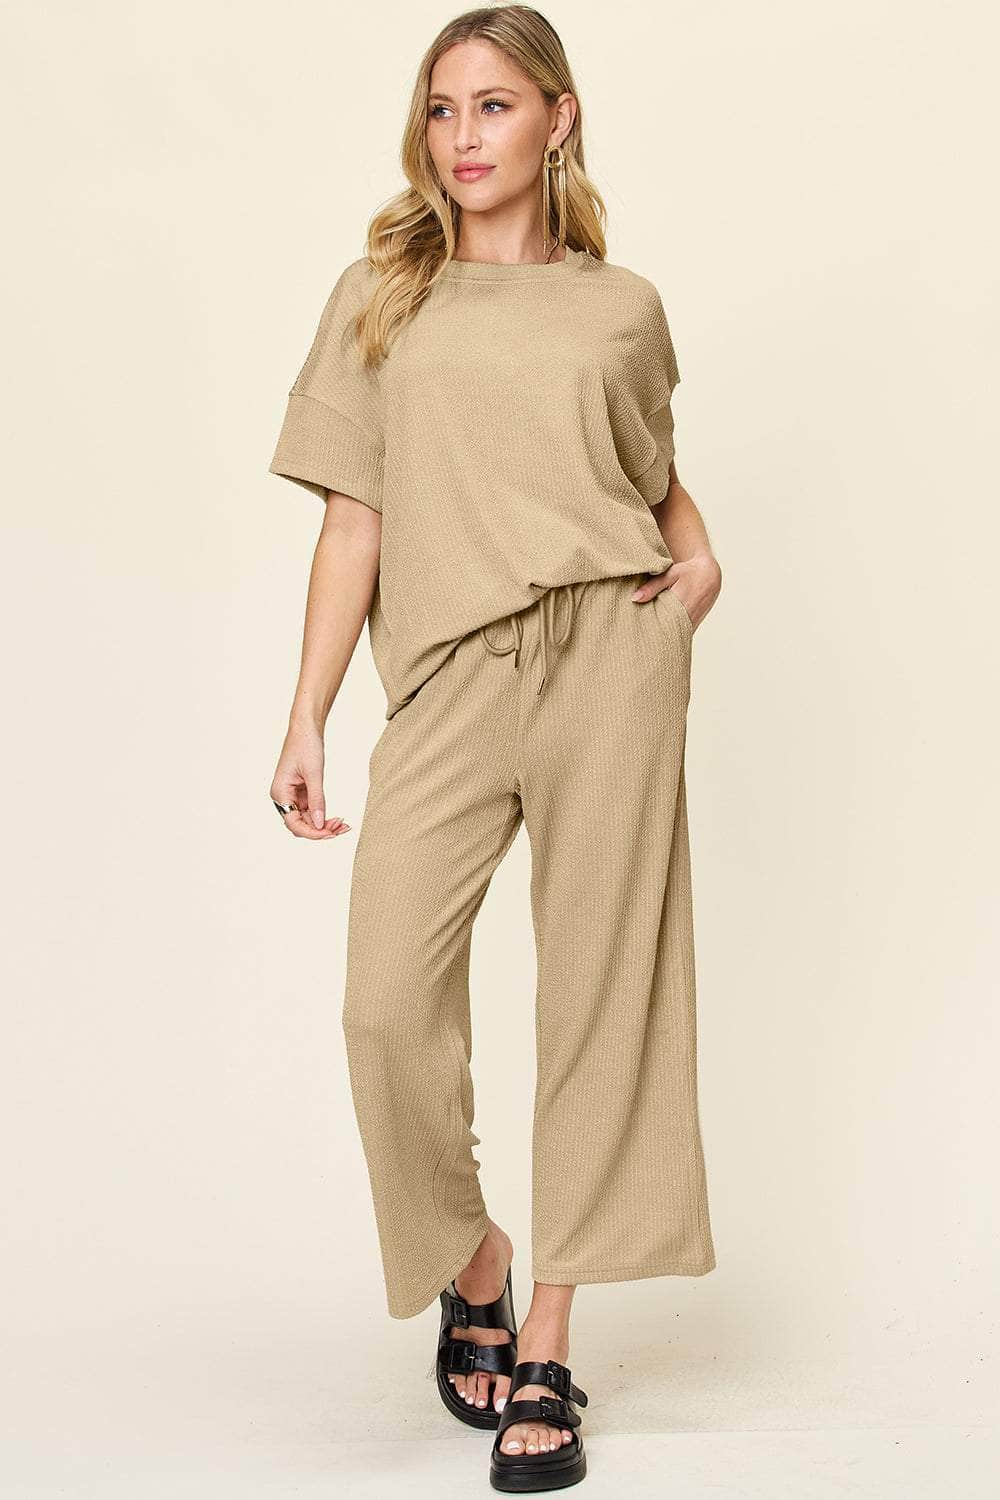 Double Take Full Size Texture Round Neck Short Sleeve T-Shirt and Wide Leg Pants Khaki / S